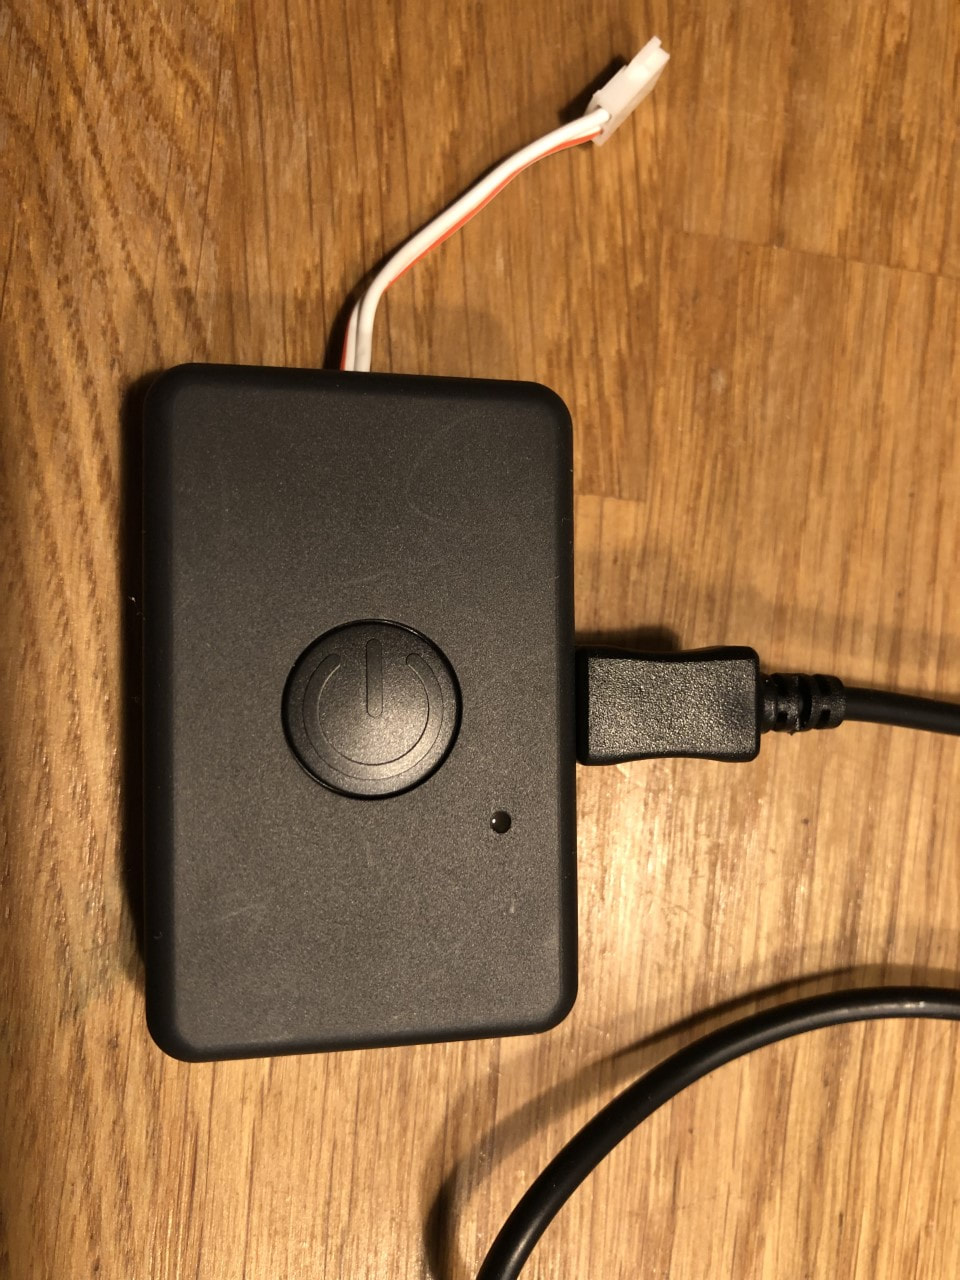 The power bank for the Vizirider. It's charged with a USB cable